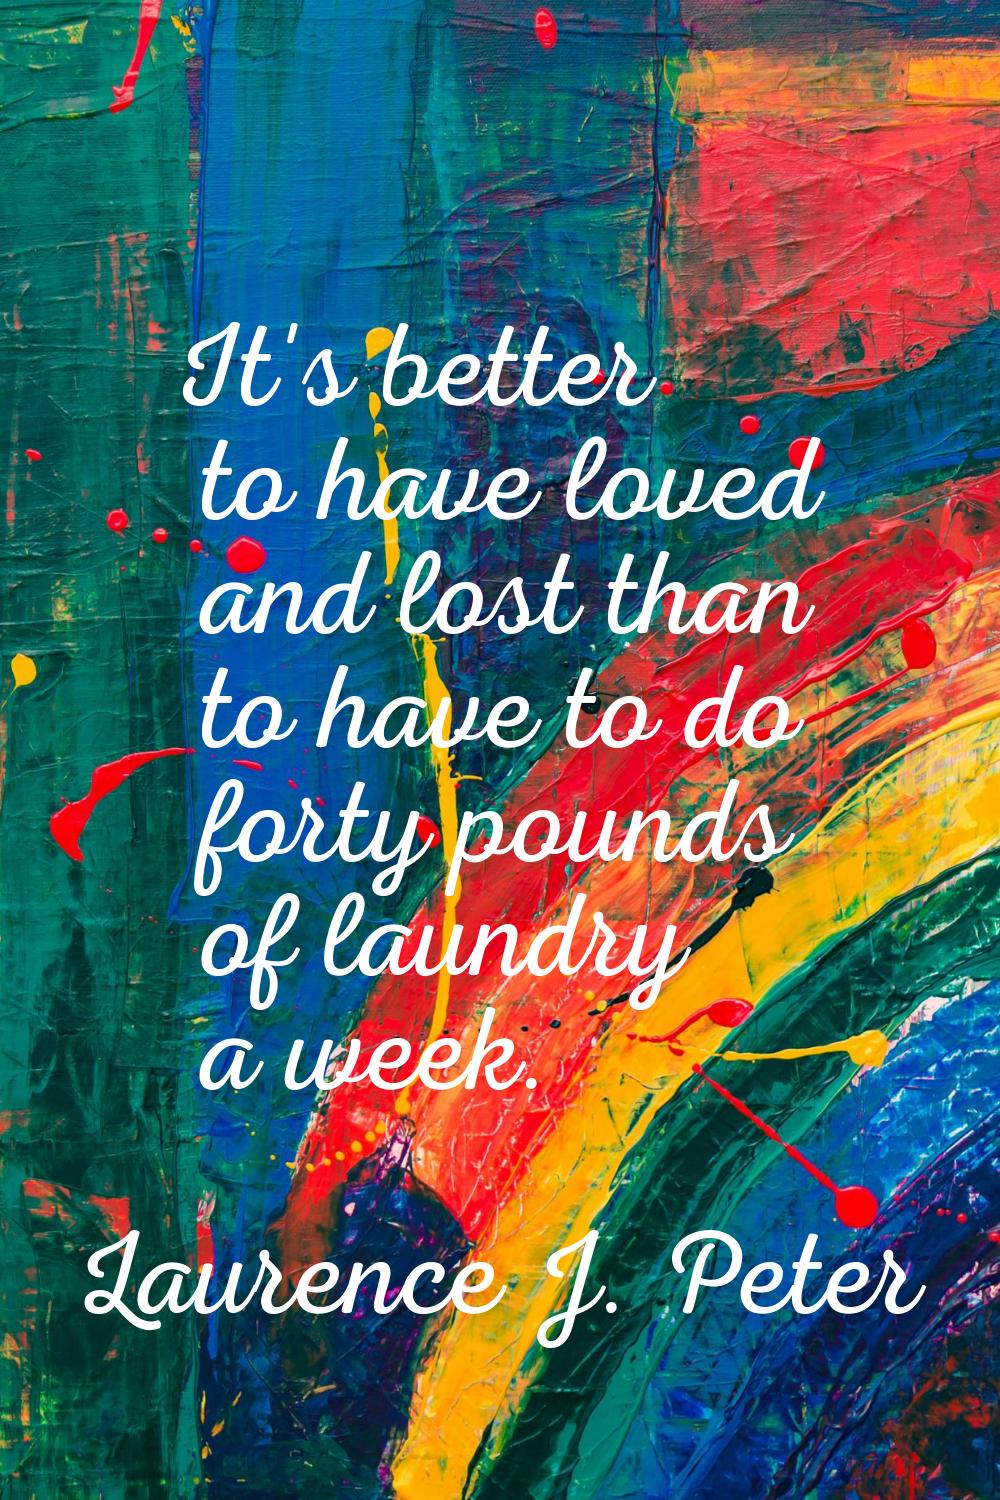 It's better to have loved and lost than to have to do forty pounds of laundry a week.